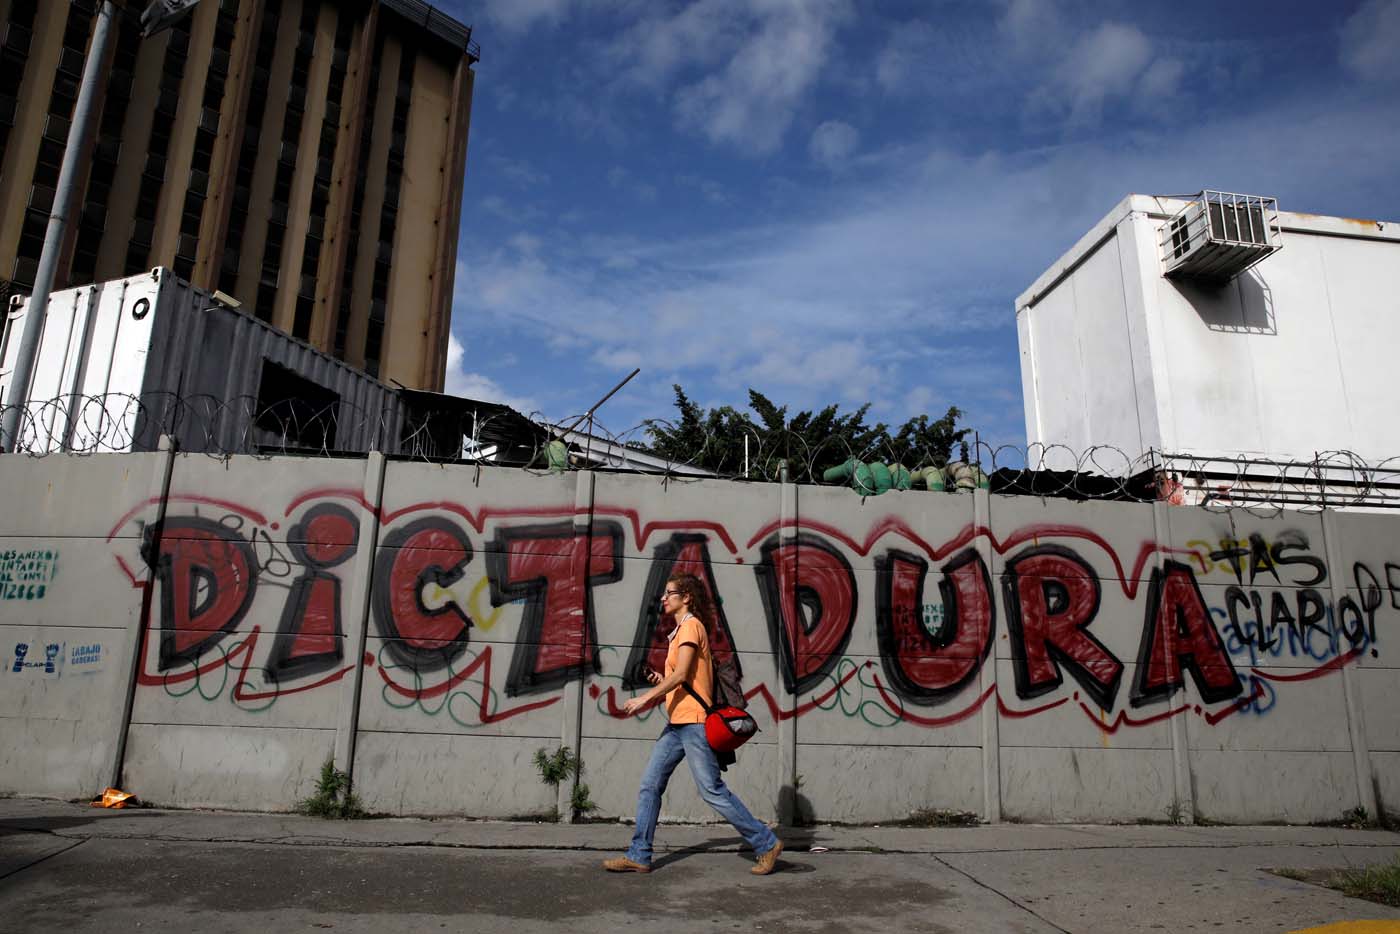 A woman walks in front of a graffiti that reads "Dictatorship" during a strike called to protest against Venezuelan President Nicolas Maduro's government in Caracas, Venezuela, July 20, 2017. REUTERS/Carlos Garcia Rawlins